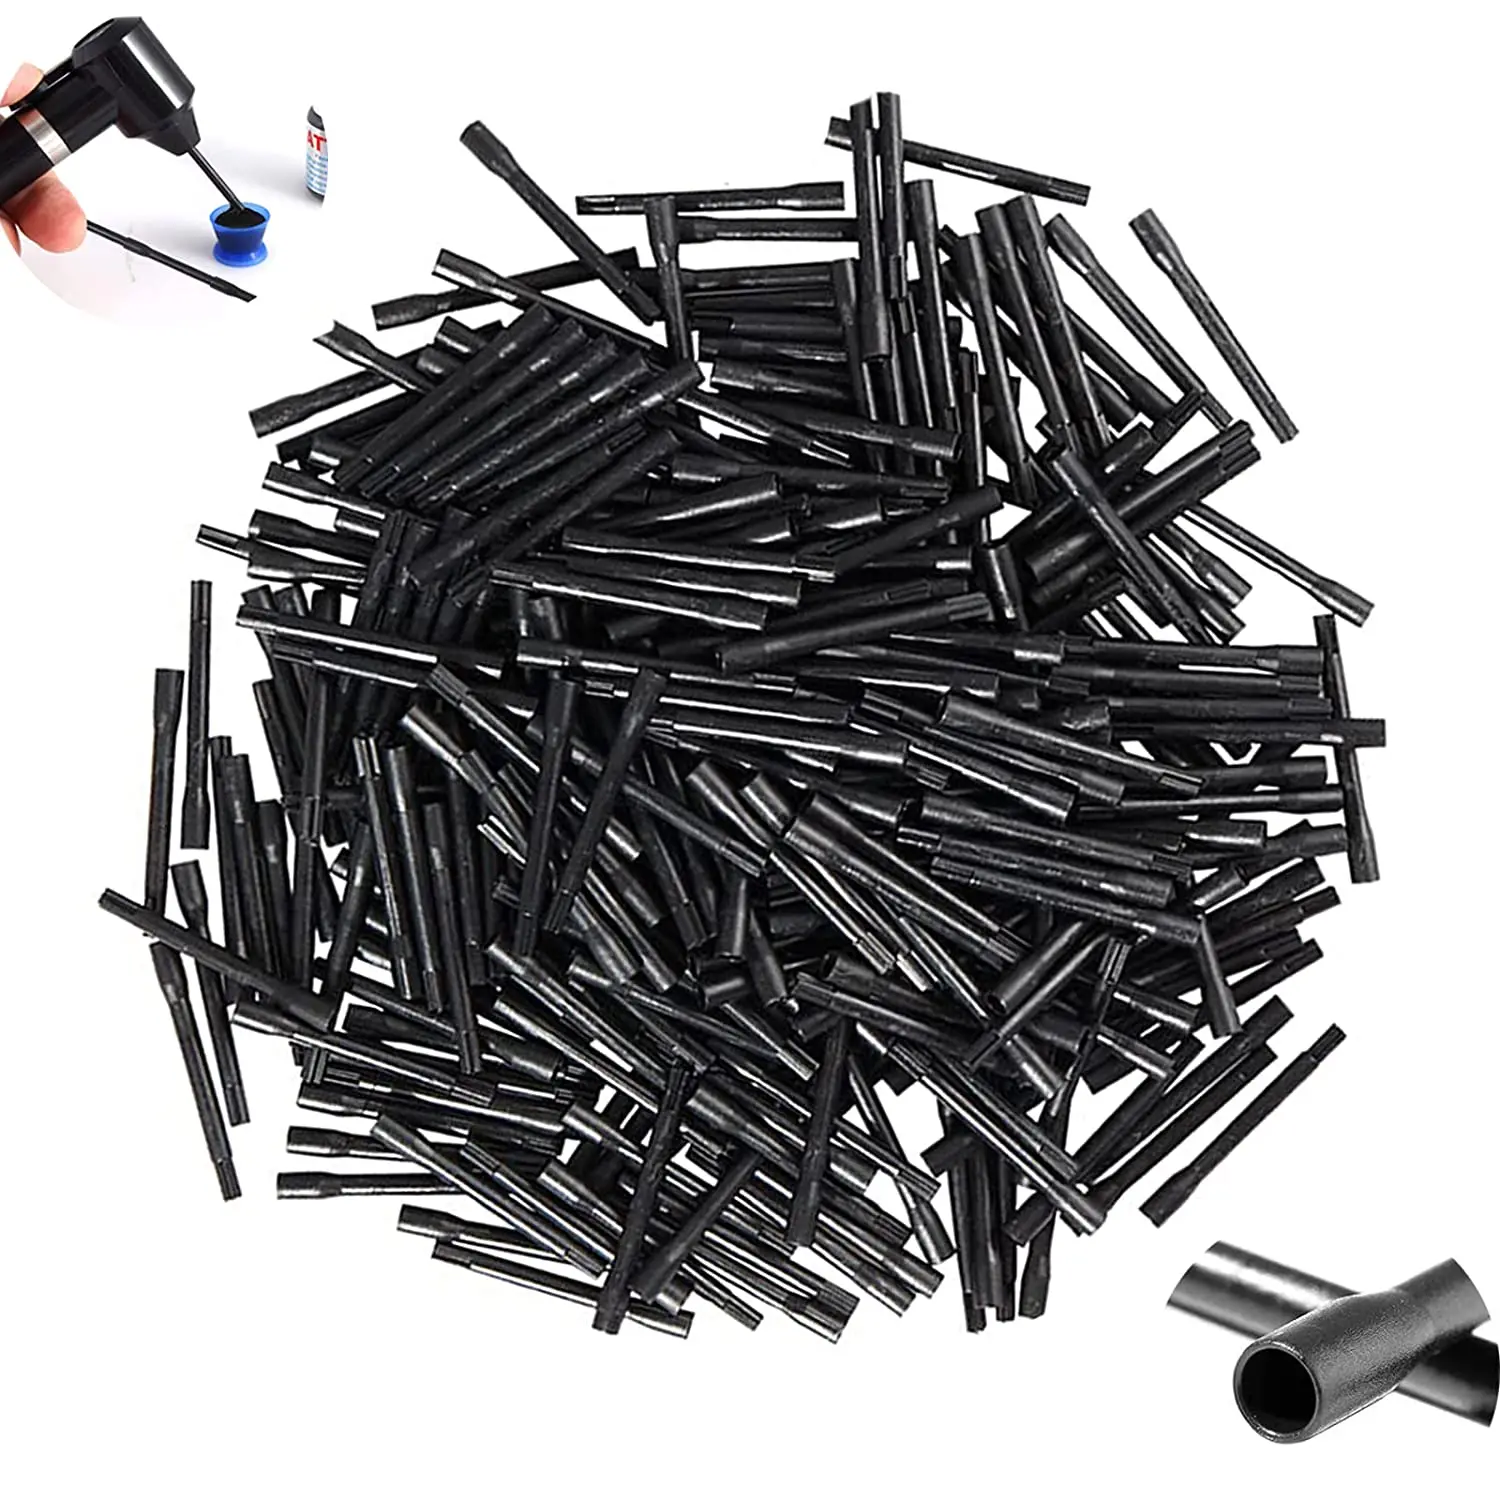 100Pcs Tattoo Ink Mixer Sticks Tattoo Pigment Mixing Sticks Plastic Stirring Rods Makeup Eyebrow Microblading Tool for Tattoo watercolor palette pallet trays case artist student diy pigment painting mixed plate plastic empty mixing holder